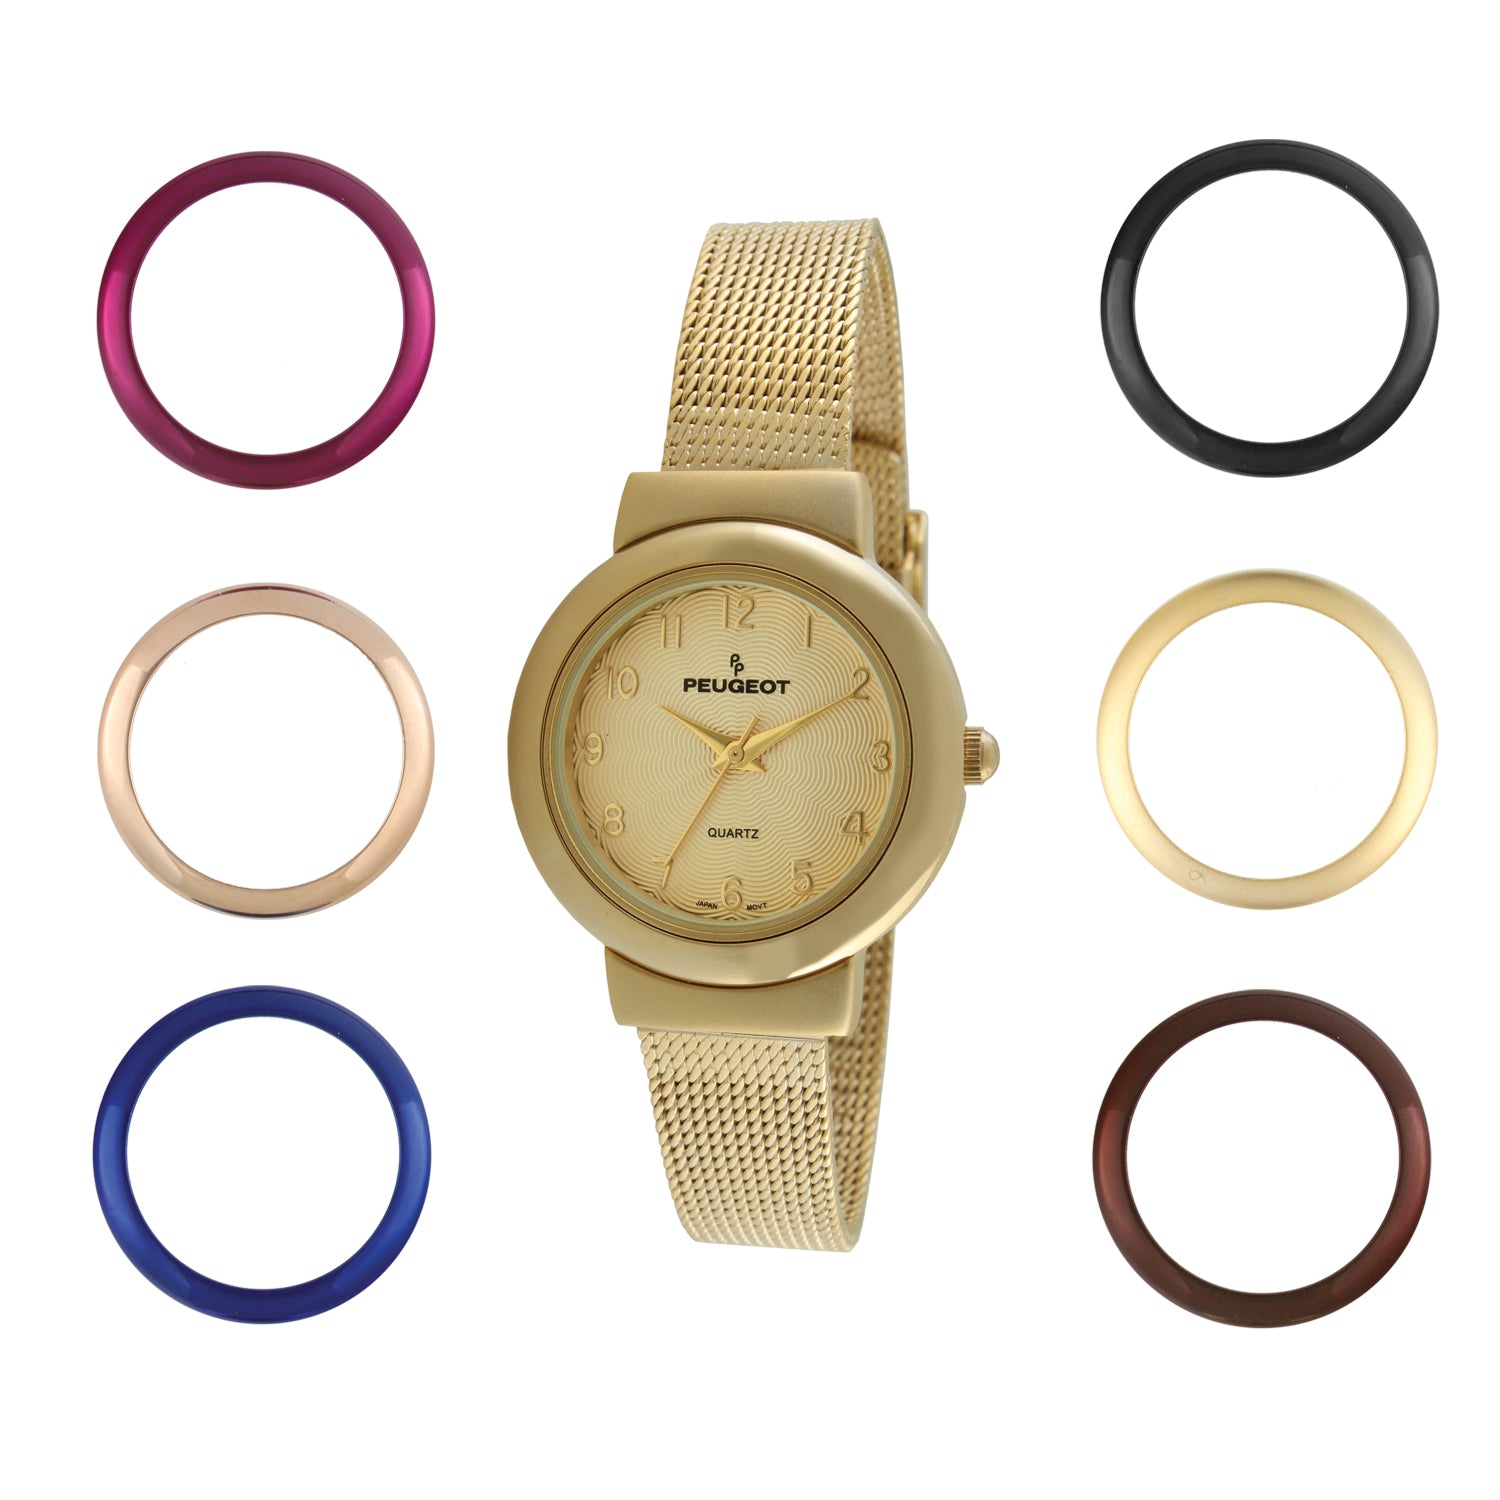 6 Women's Watches to Gift on Valentine's Day 2021